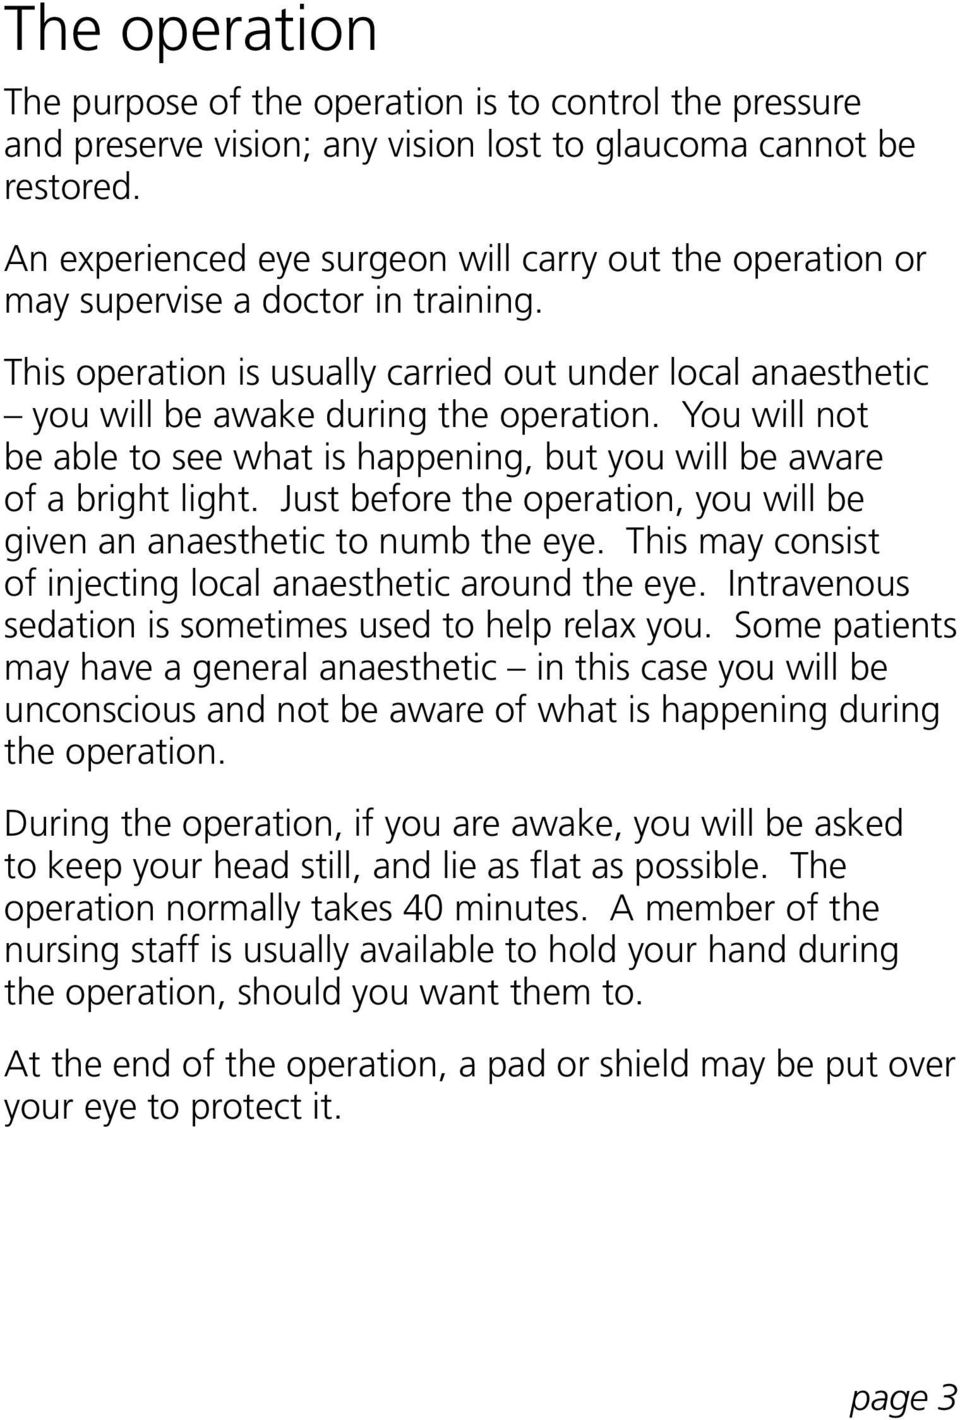 You will not be able to see what is happening, but you will be aware of a bright light. Just before the operation, you will be given an anaesthetic to numb the eye.